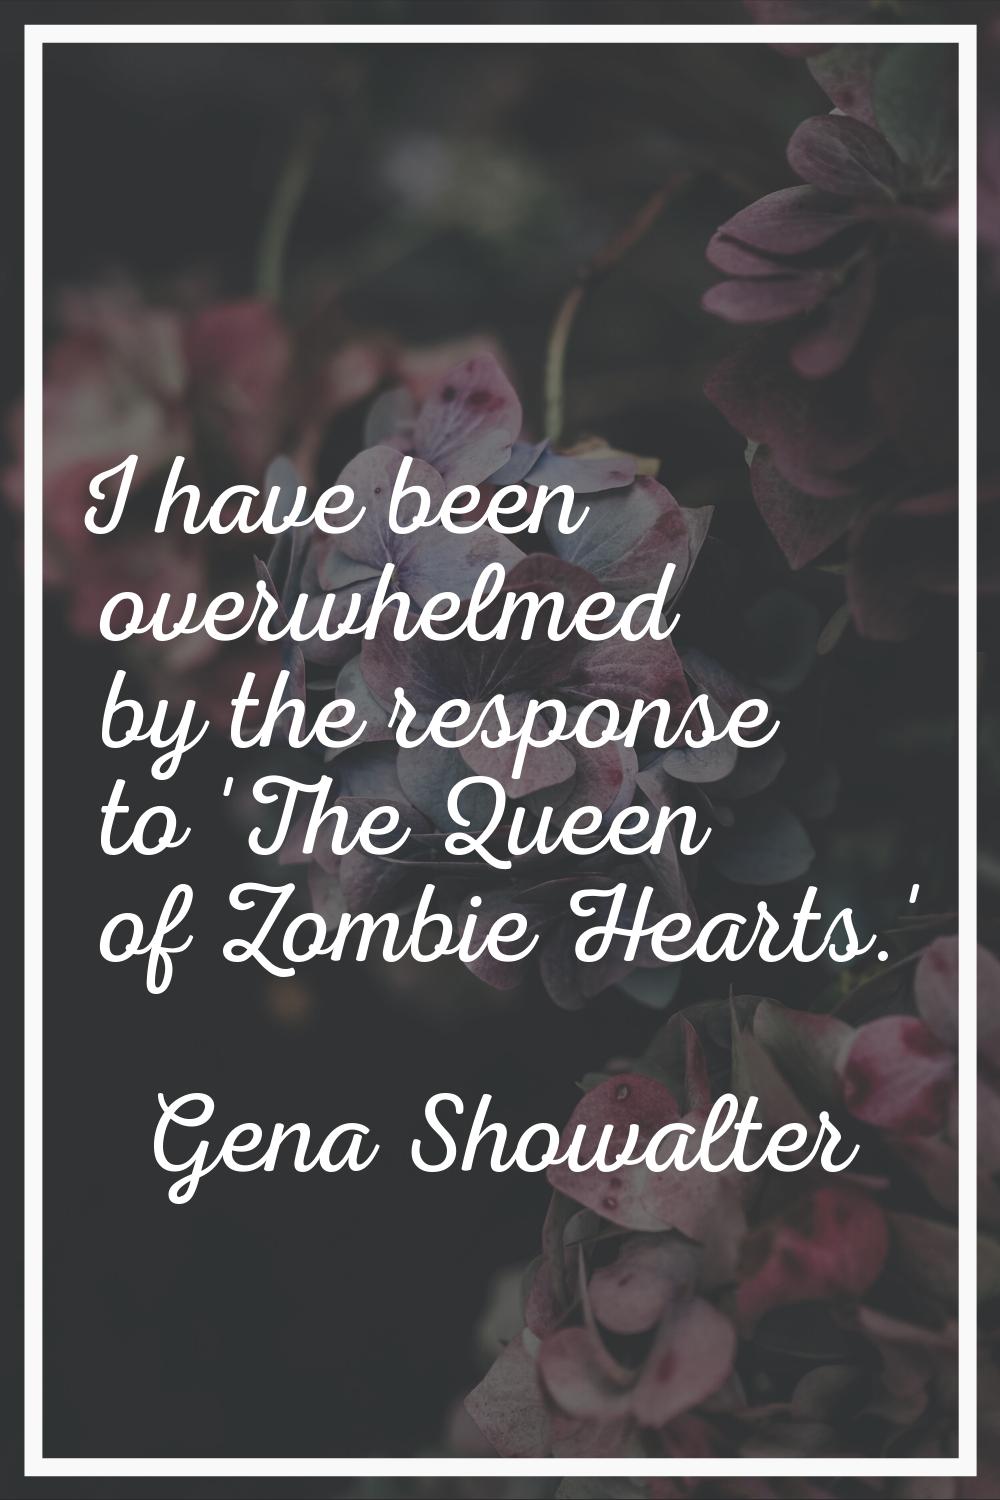 I have been overwhelmed by the response to 'The Queen of Zombie Hearts.'